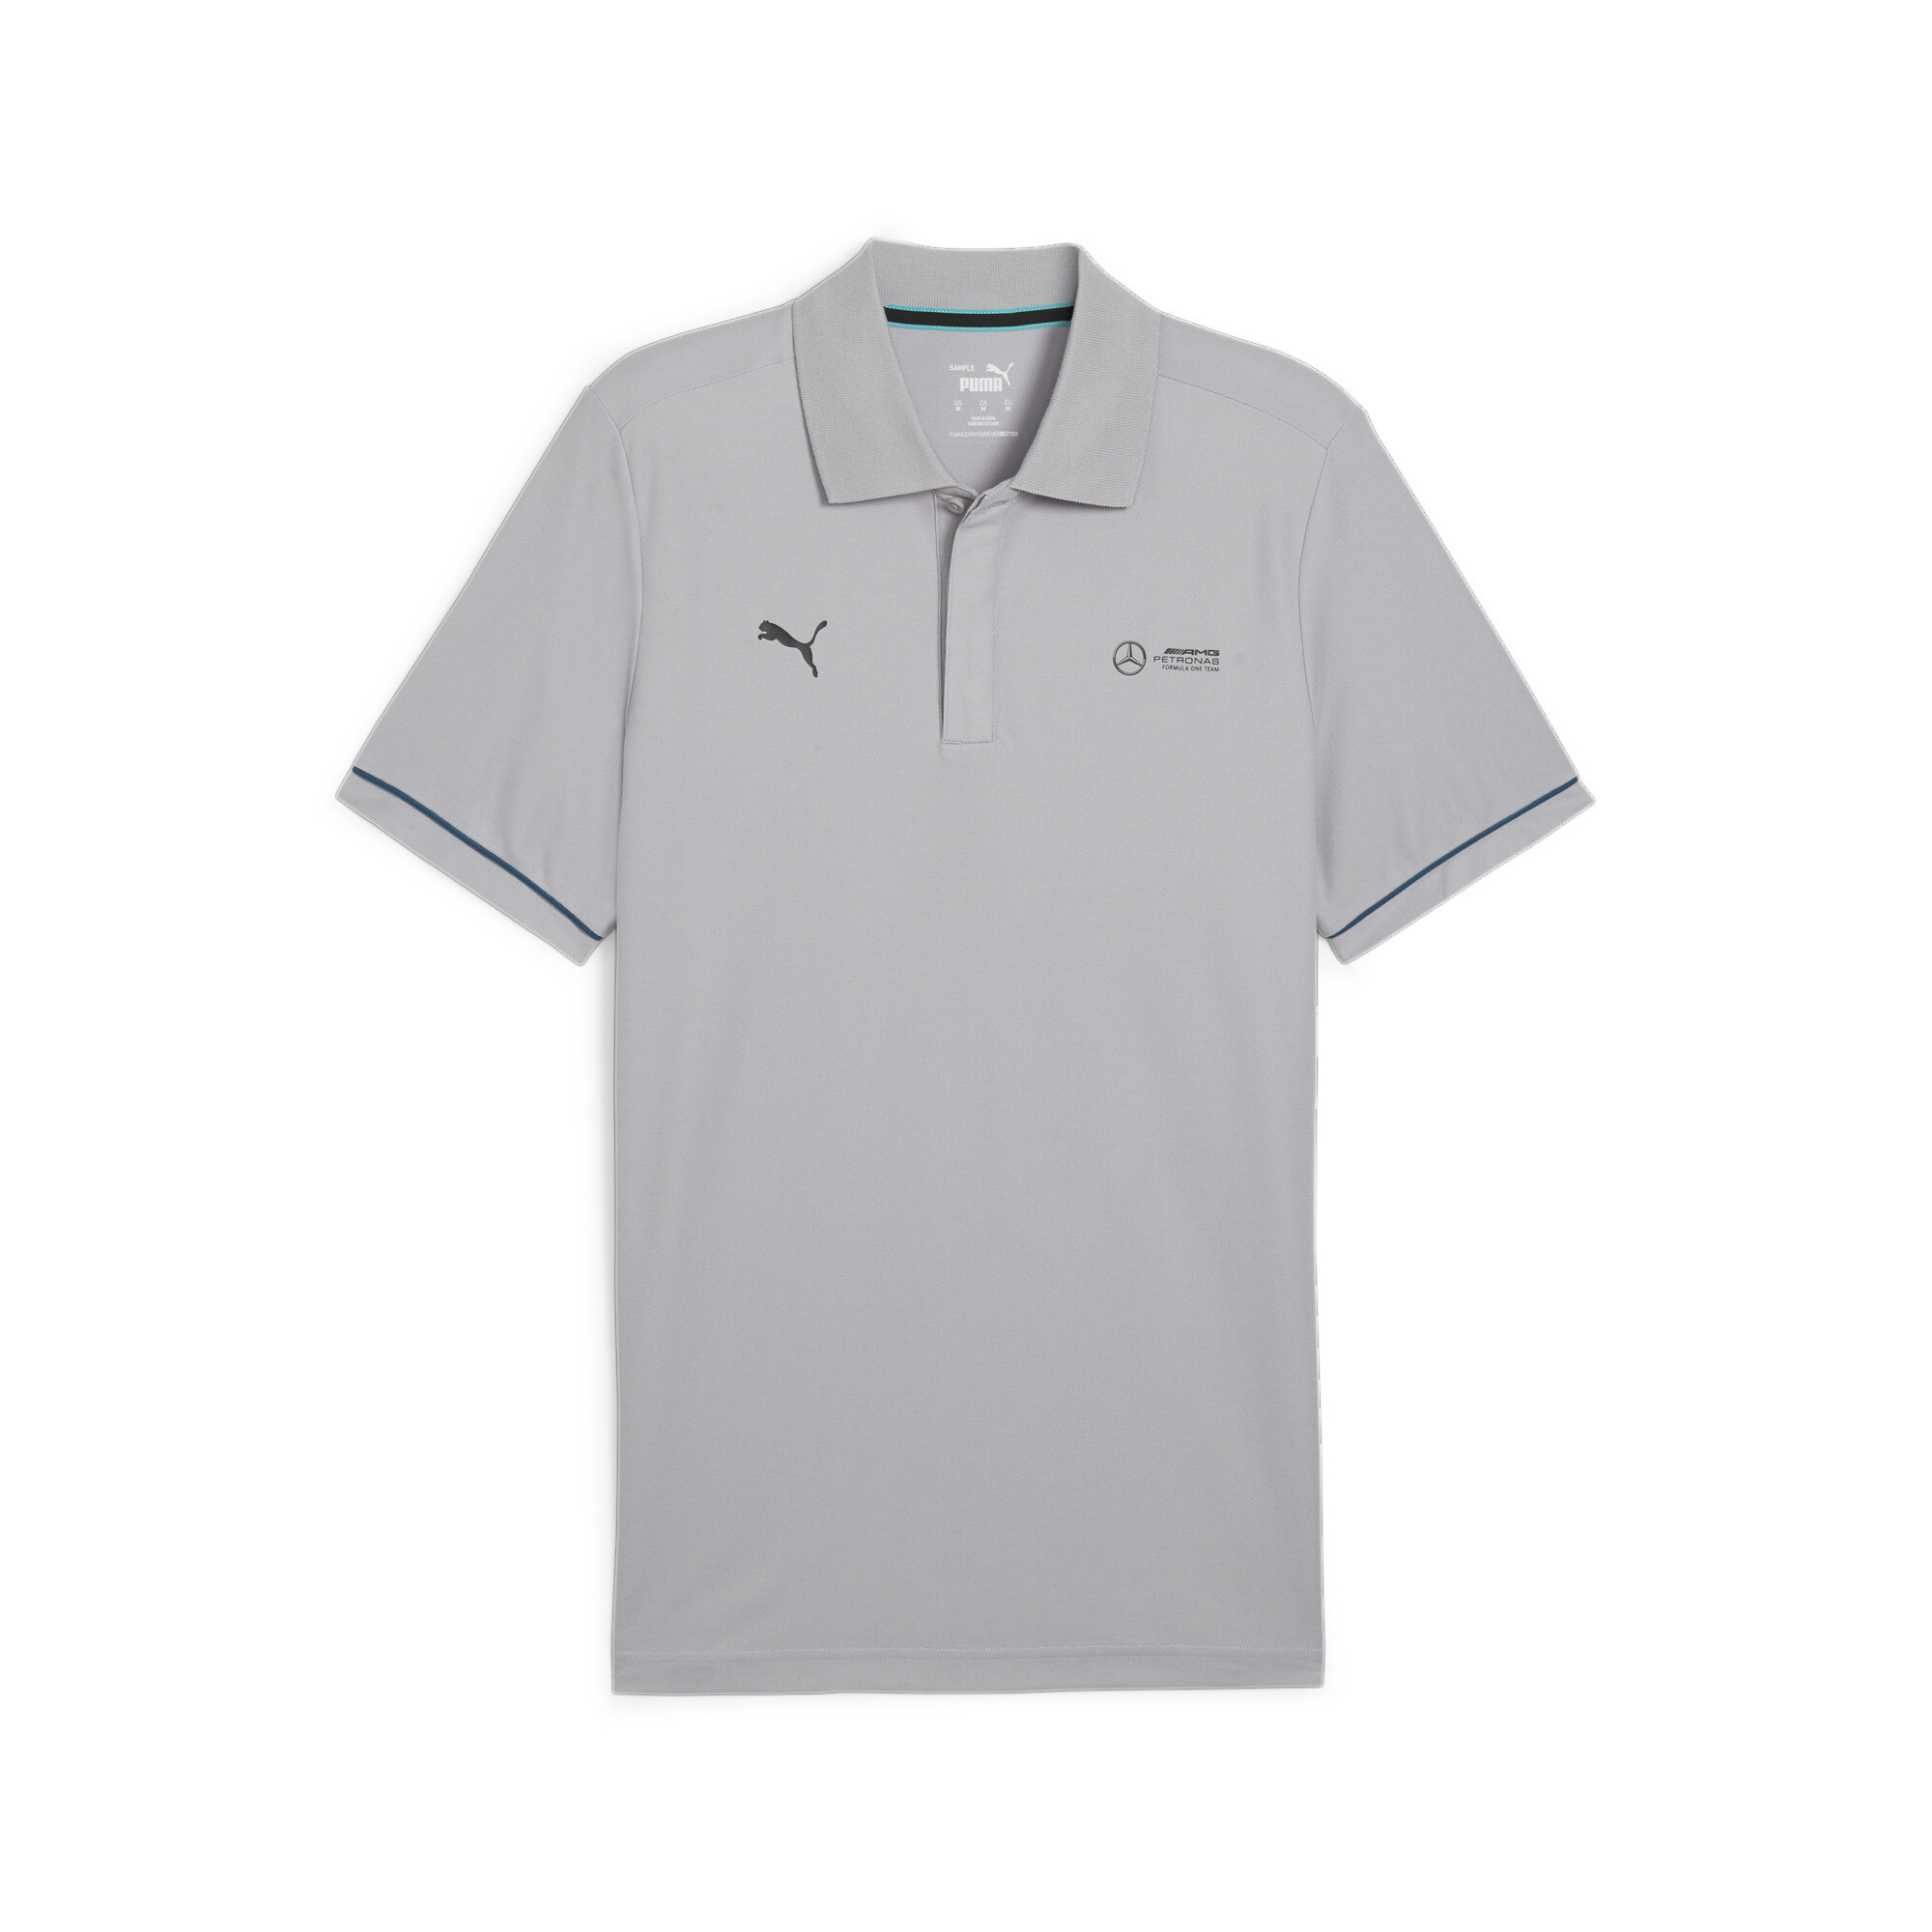 Men's PUMA Mercedes-AMG Petronas Motorsport Polo In Gray, Size Large